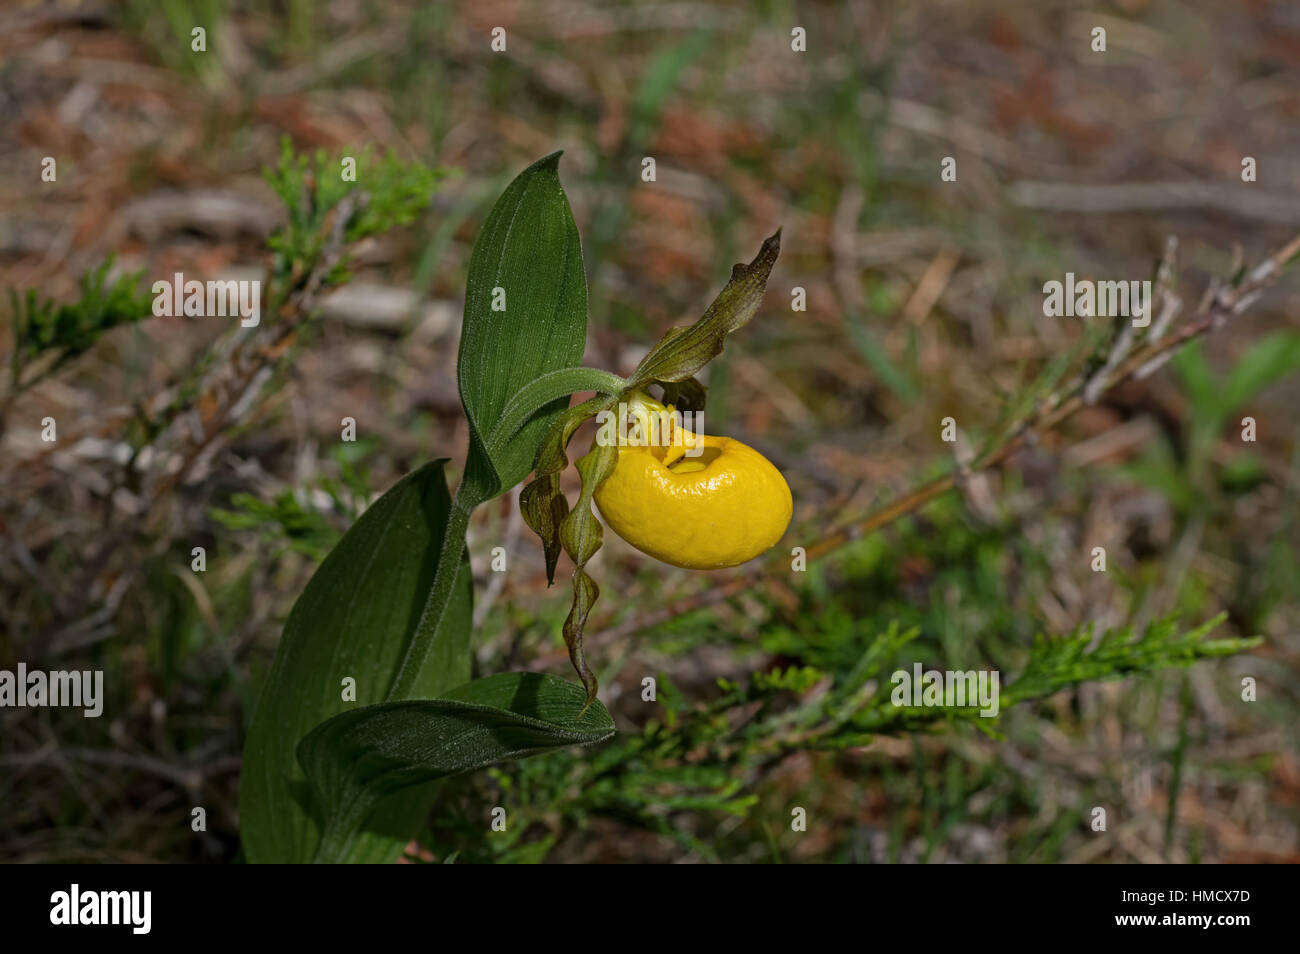 Cypripedium parviflorum, commonly known as yellow lady's slipper, moccasin flower, or hairy yellow lady slipper is an orchid found in North America. Stock Photo